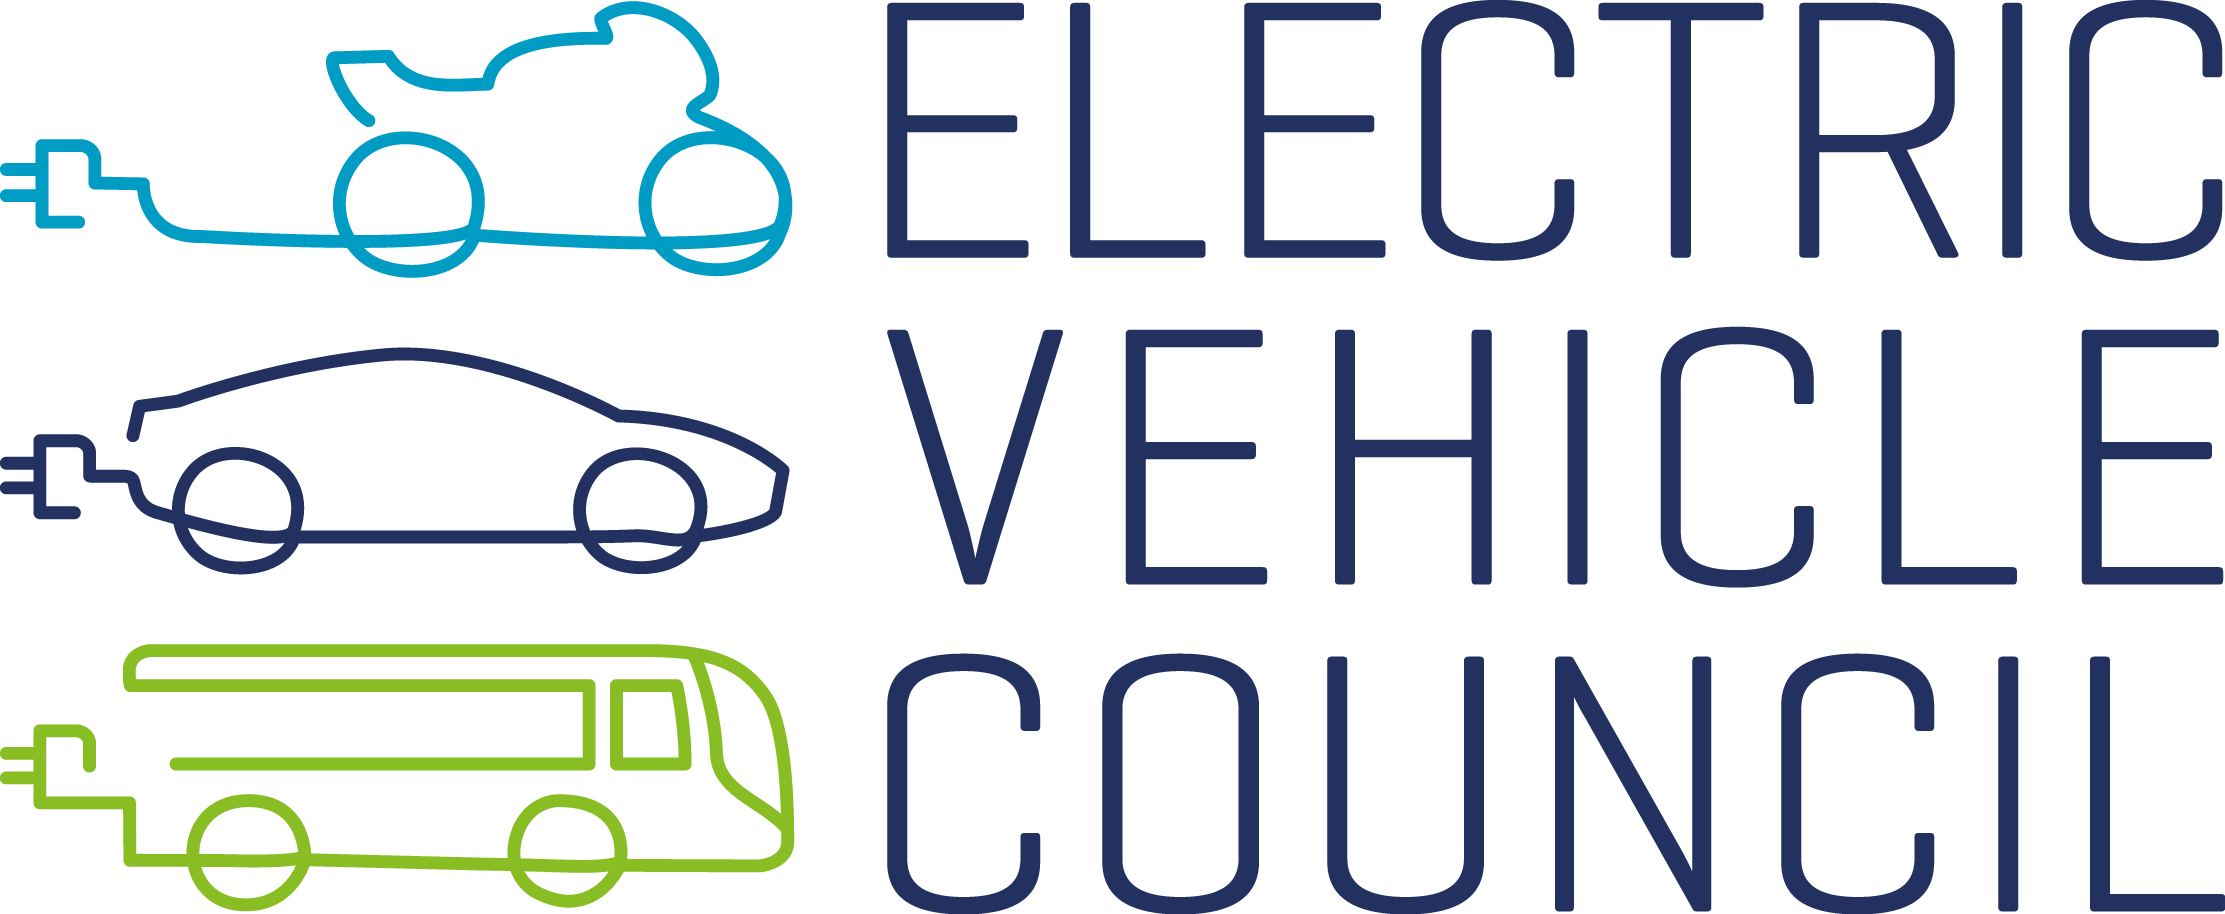 Electric Vehicle Council